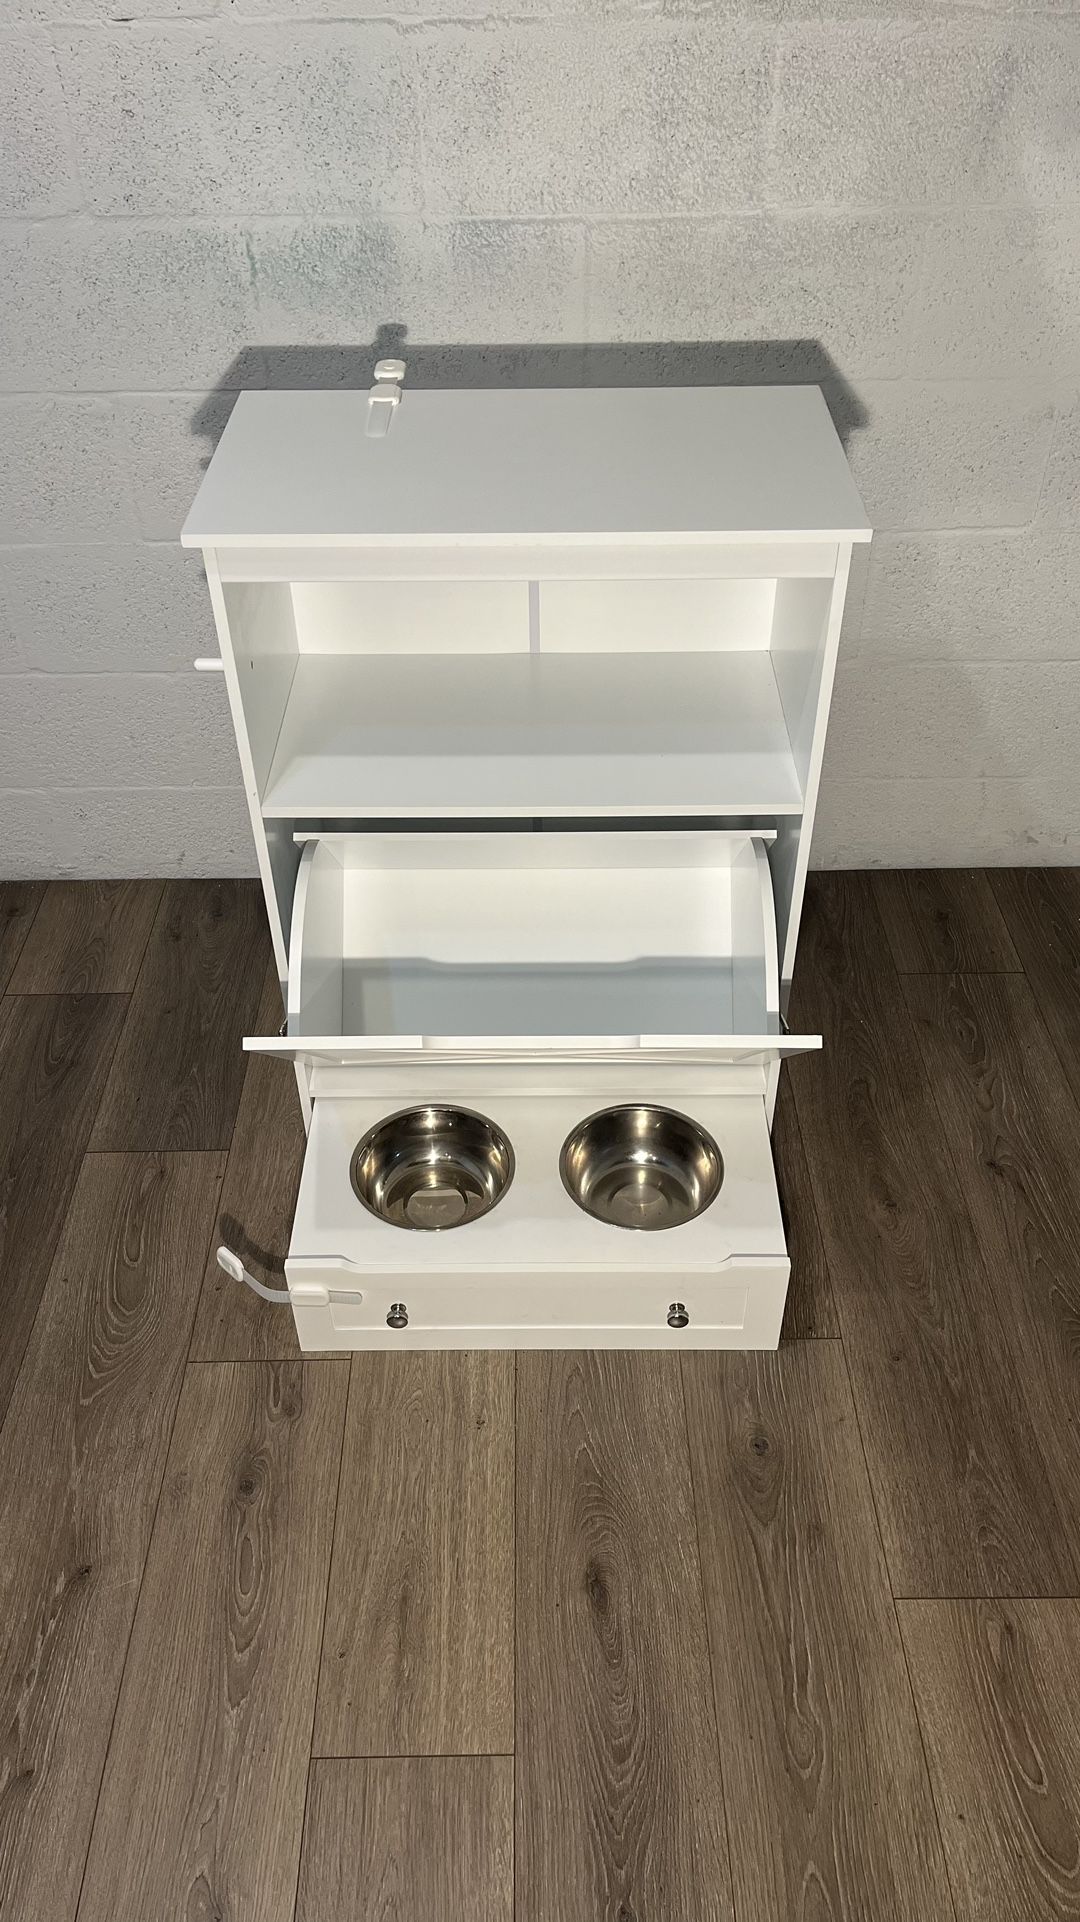 PET FEEDER STATION for DOG & CAT FOOD W STORAGE CABINET WHITE - delivery is negotiable